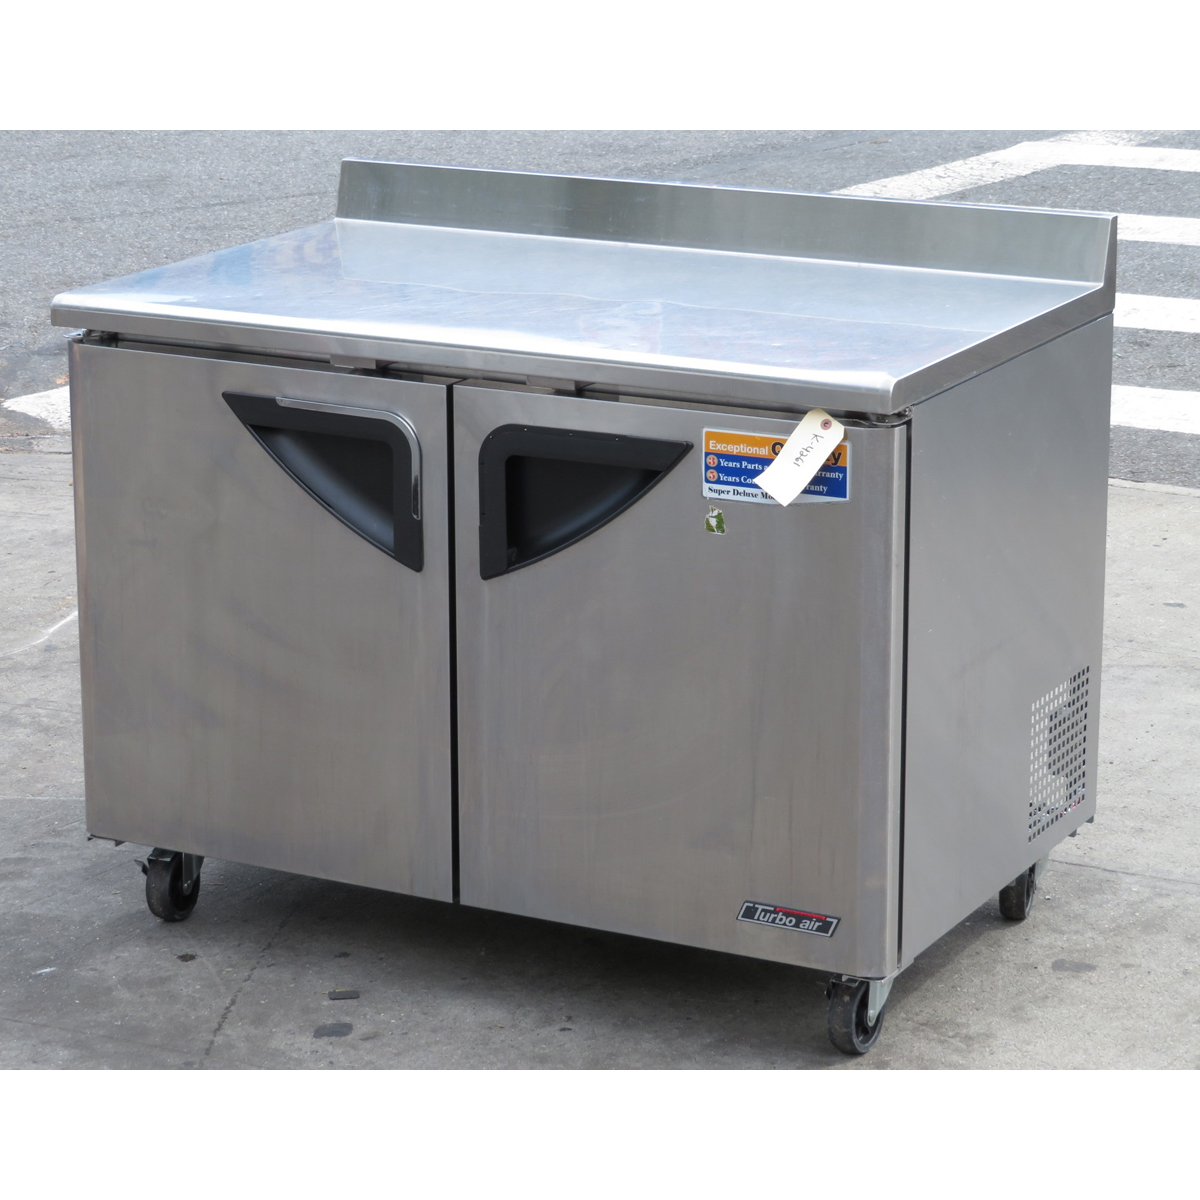 Turbo Air TWF-48SD 48" Worktop Freezer, Used Excellent Condition